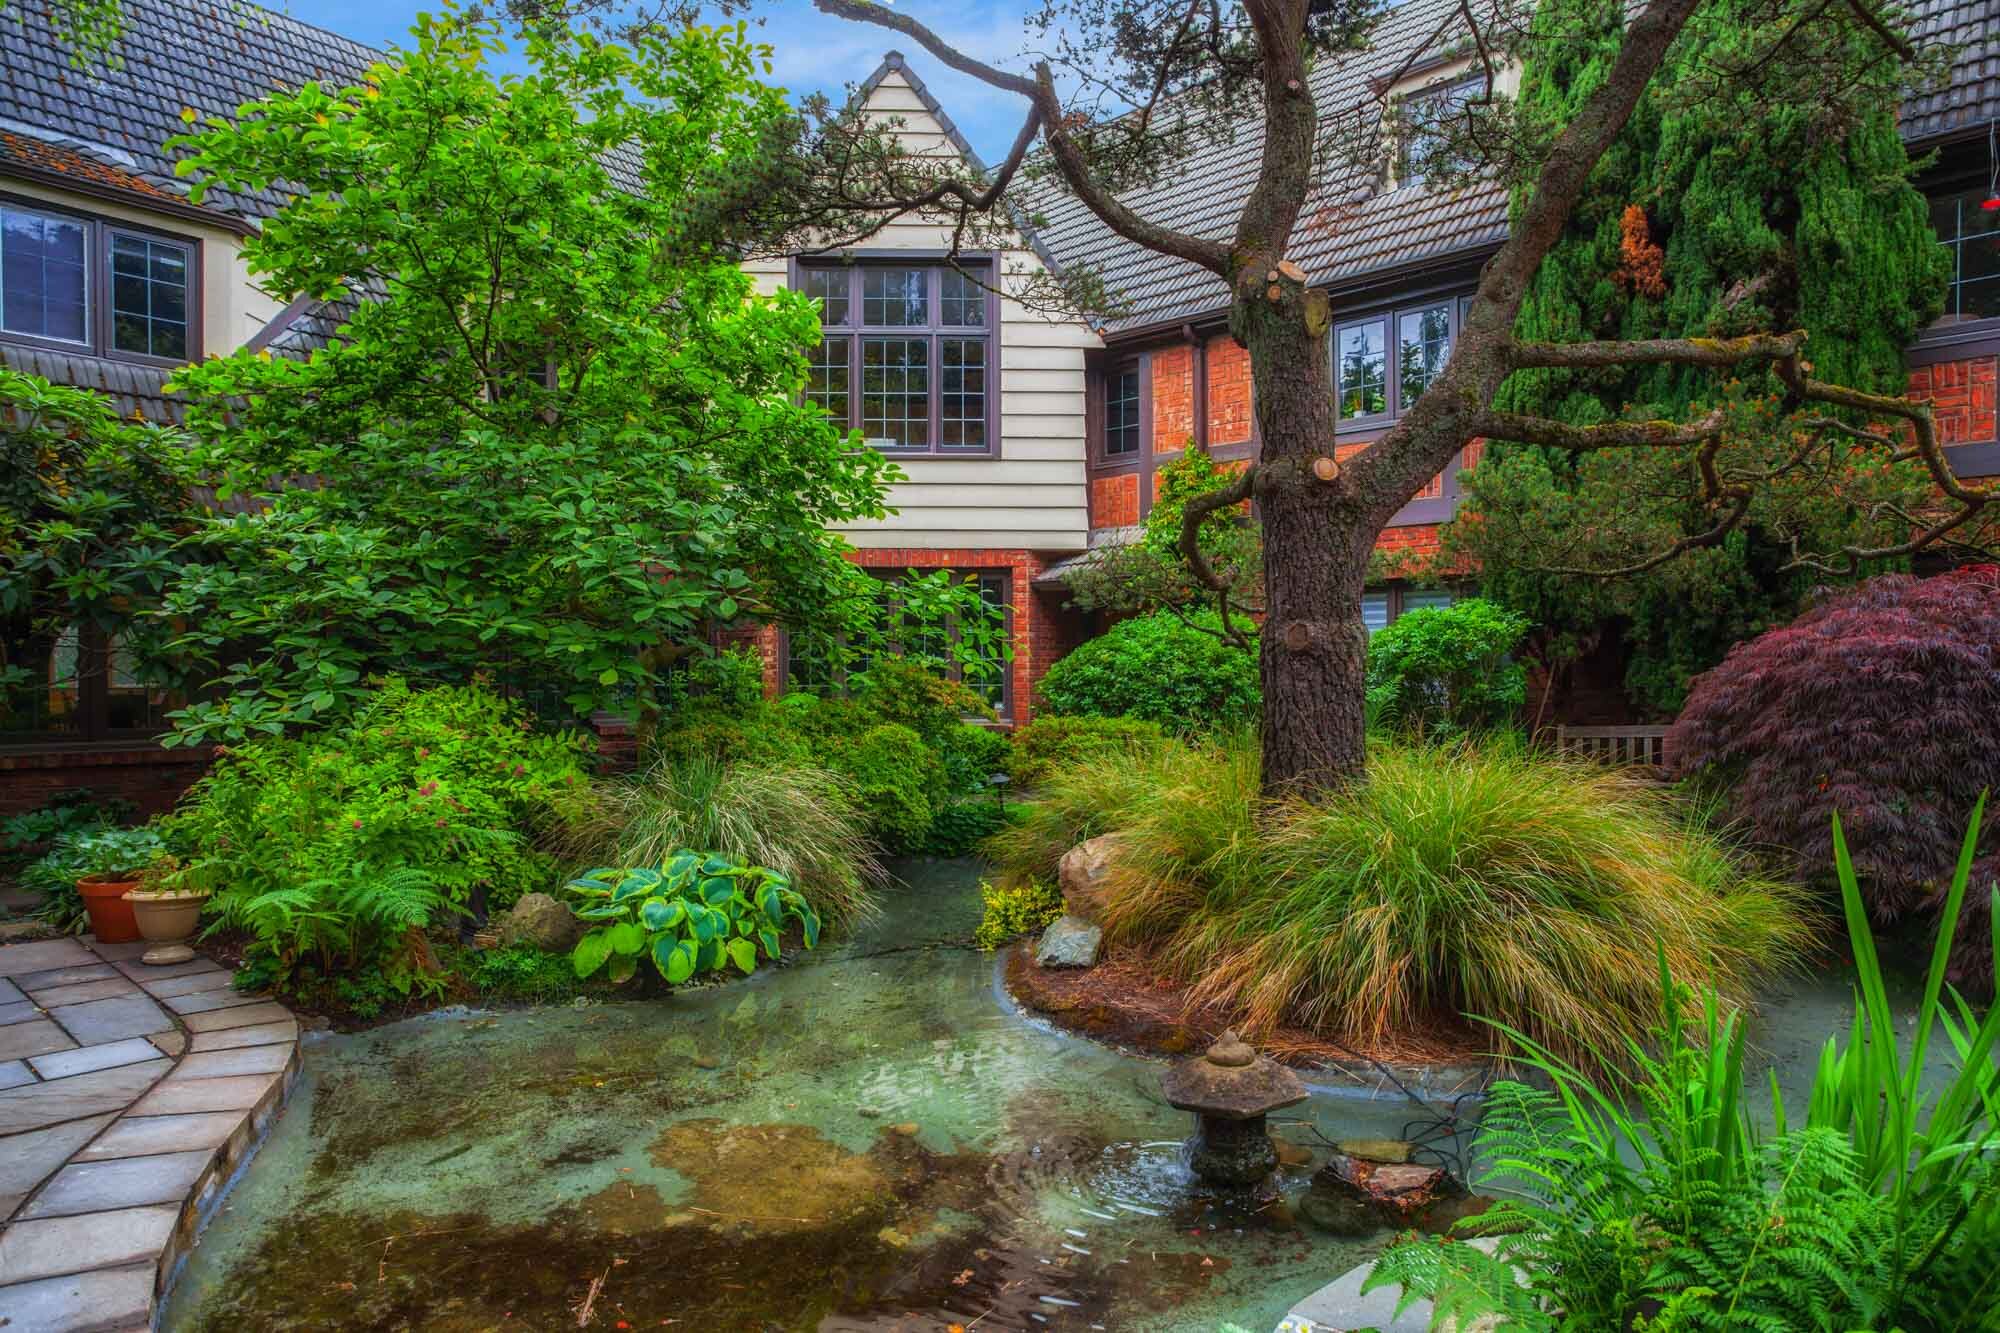  image description: exterior of storybook tudor with garden, trees, pond, and walkway 